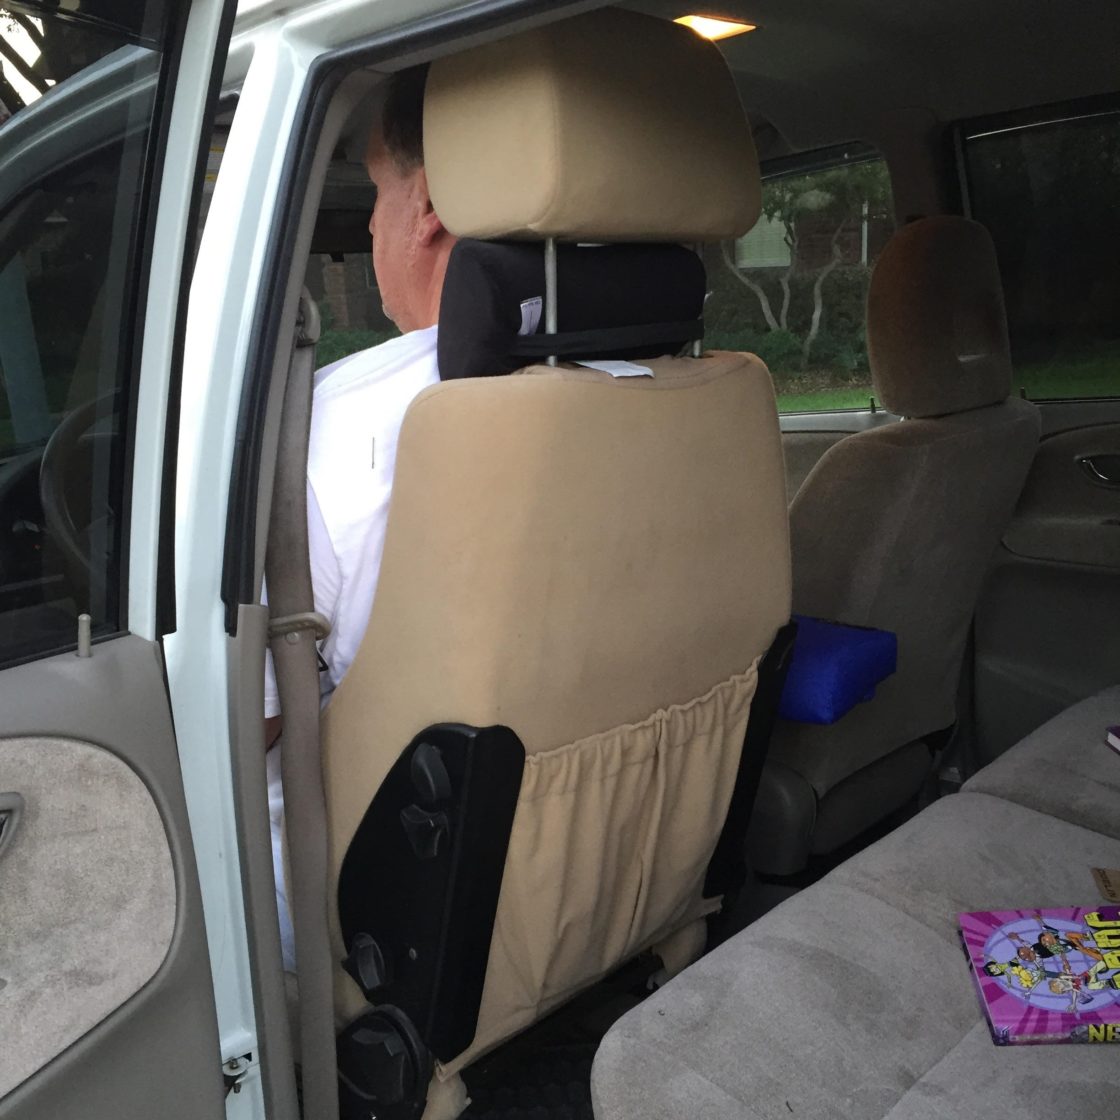 Extra Tall Car Seats For People, Most Comfortable Car Seats For Tall Drivers